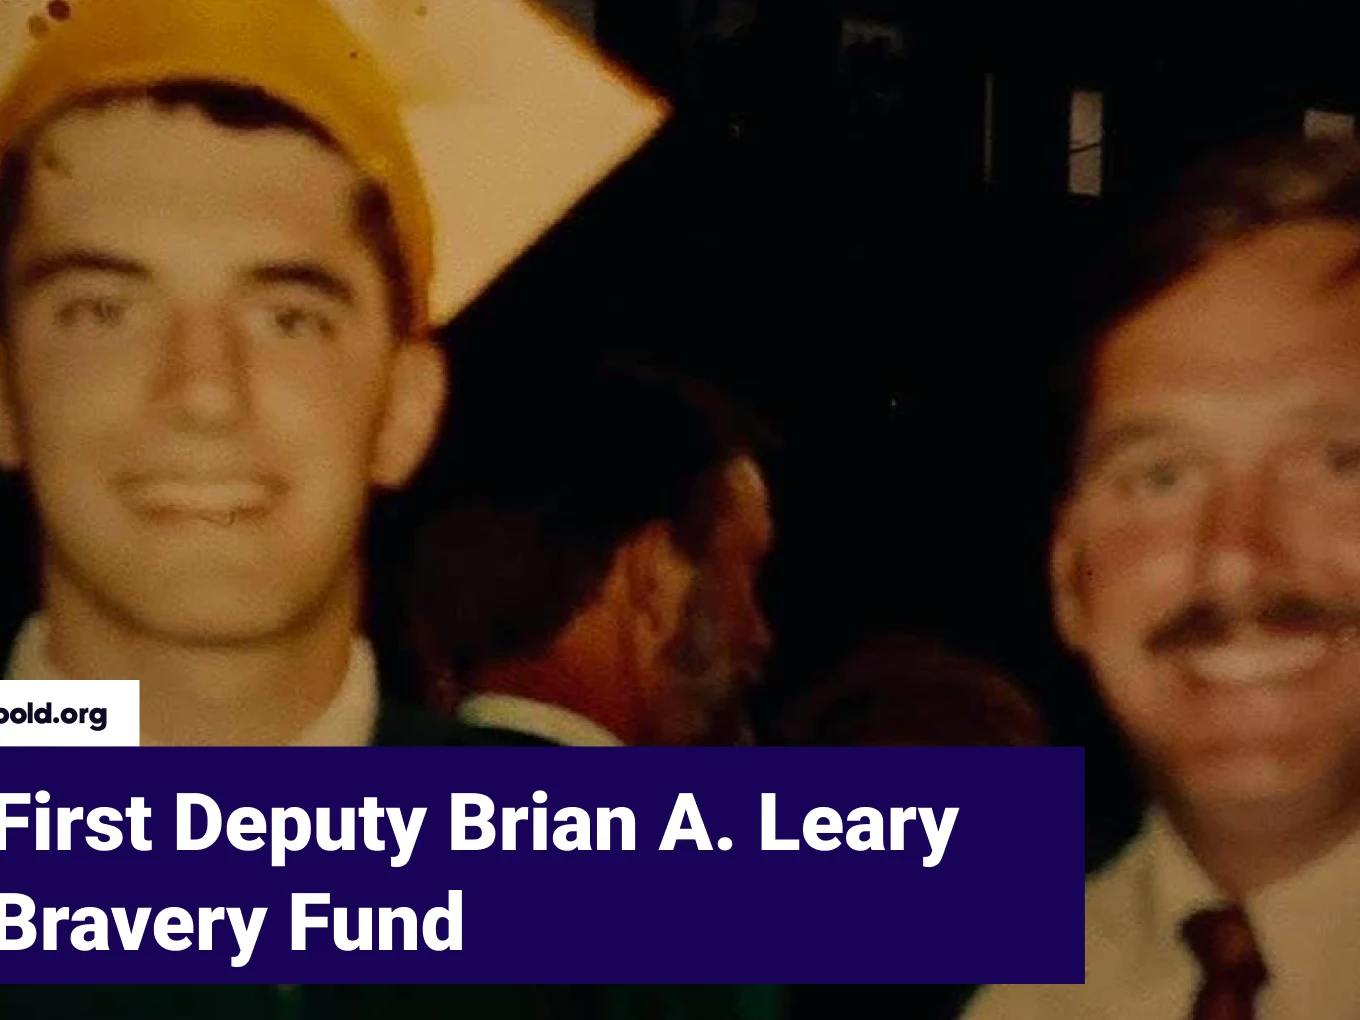 First Deputy Brian A. Leary Bravery Fund